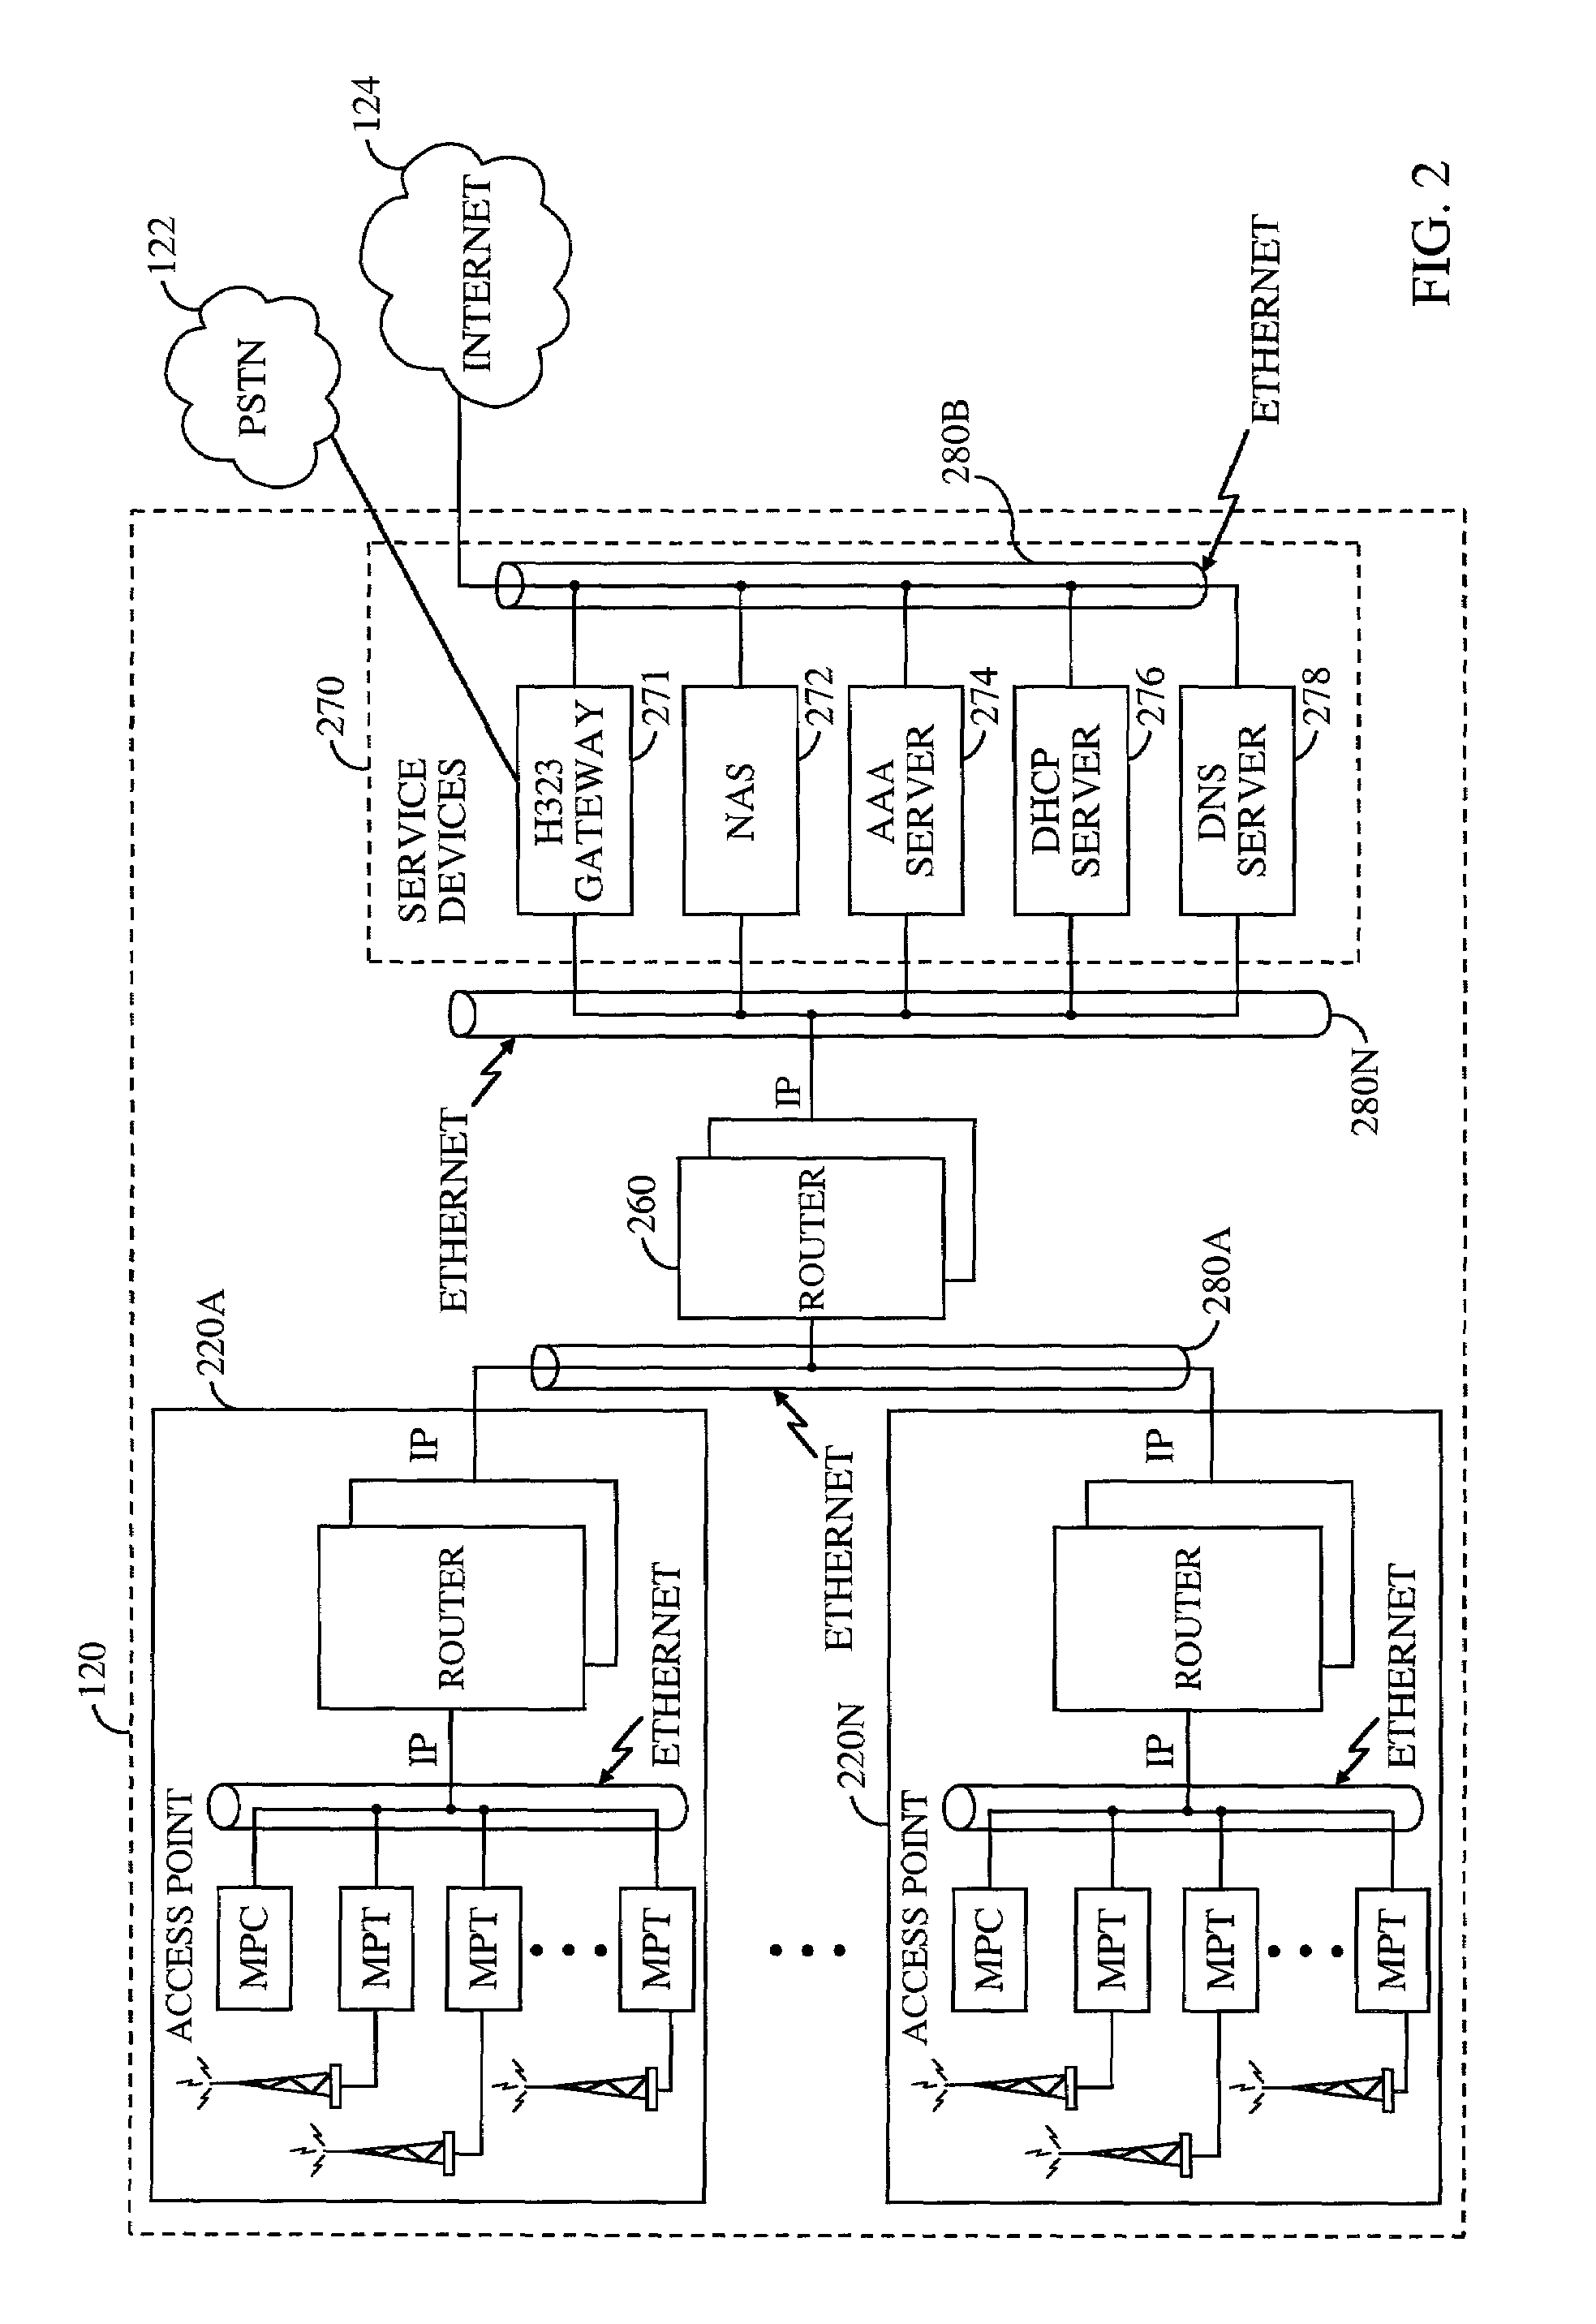 Method and apparatus for providing mobility within a network